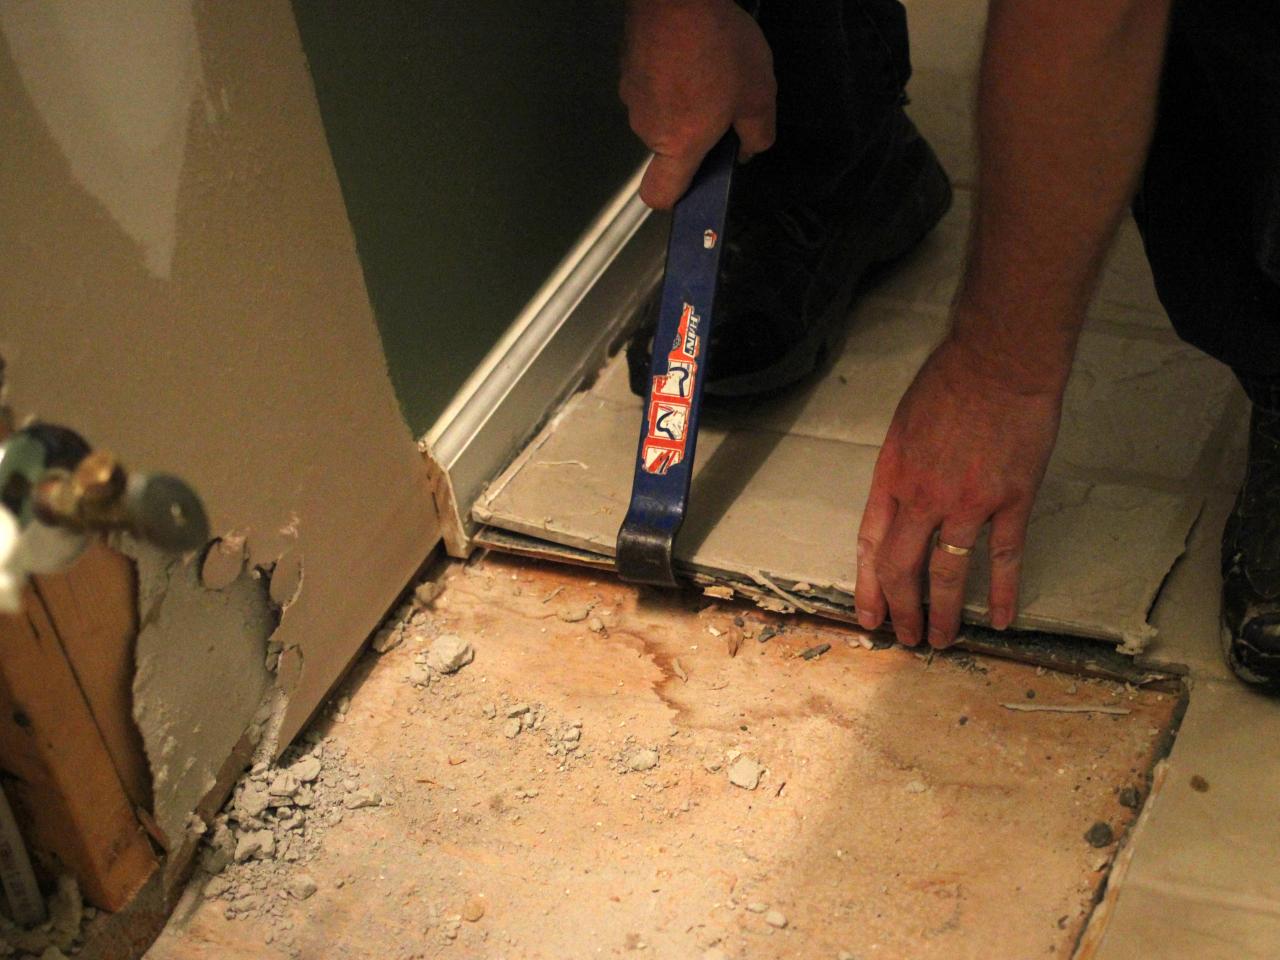 How To Remove A Tile Floor - How To Remove Tiles From Bathroom Walls